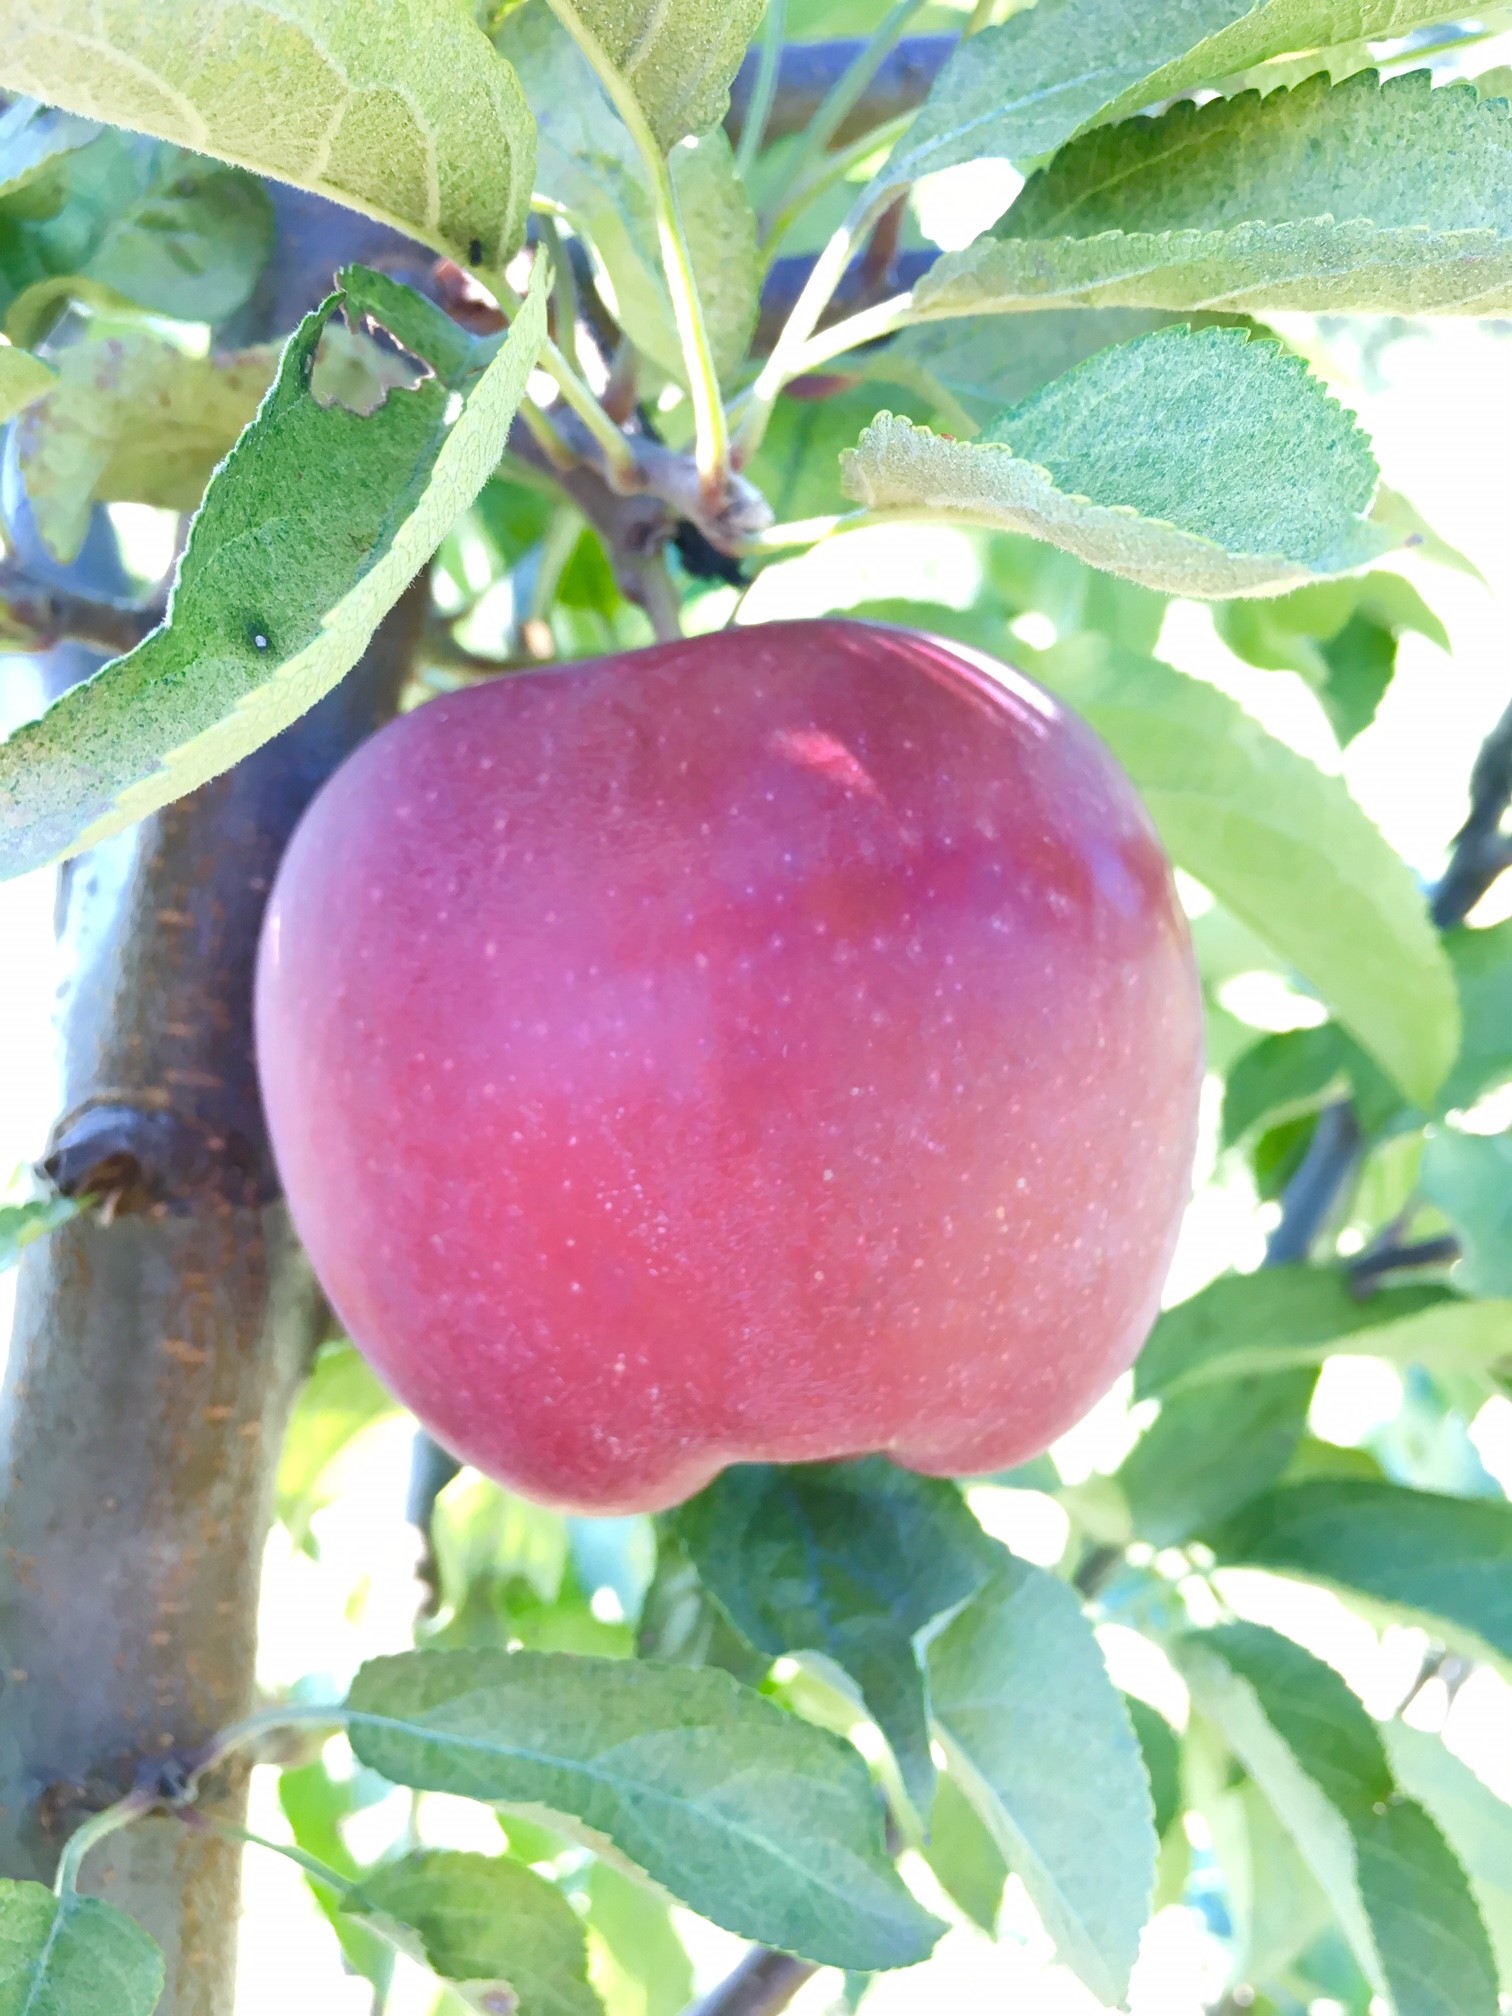 Red Delicious Apple - fruityland